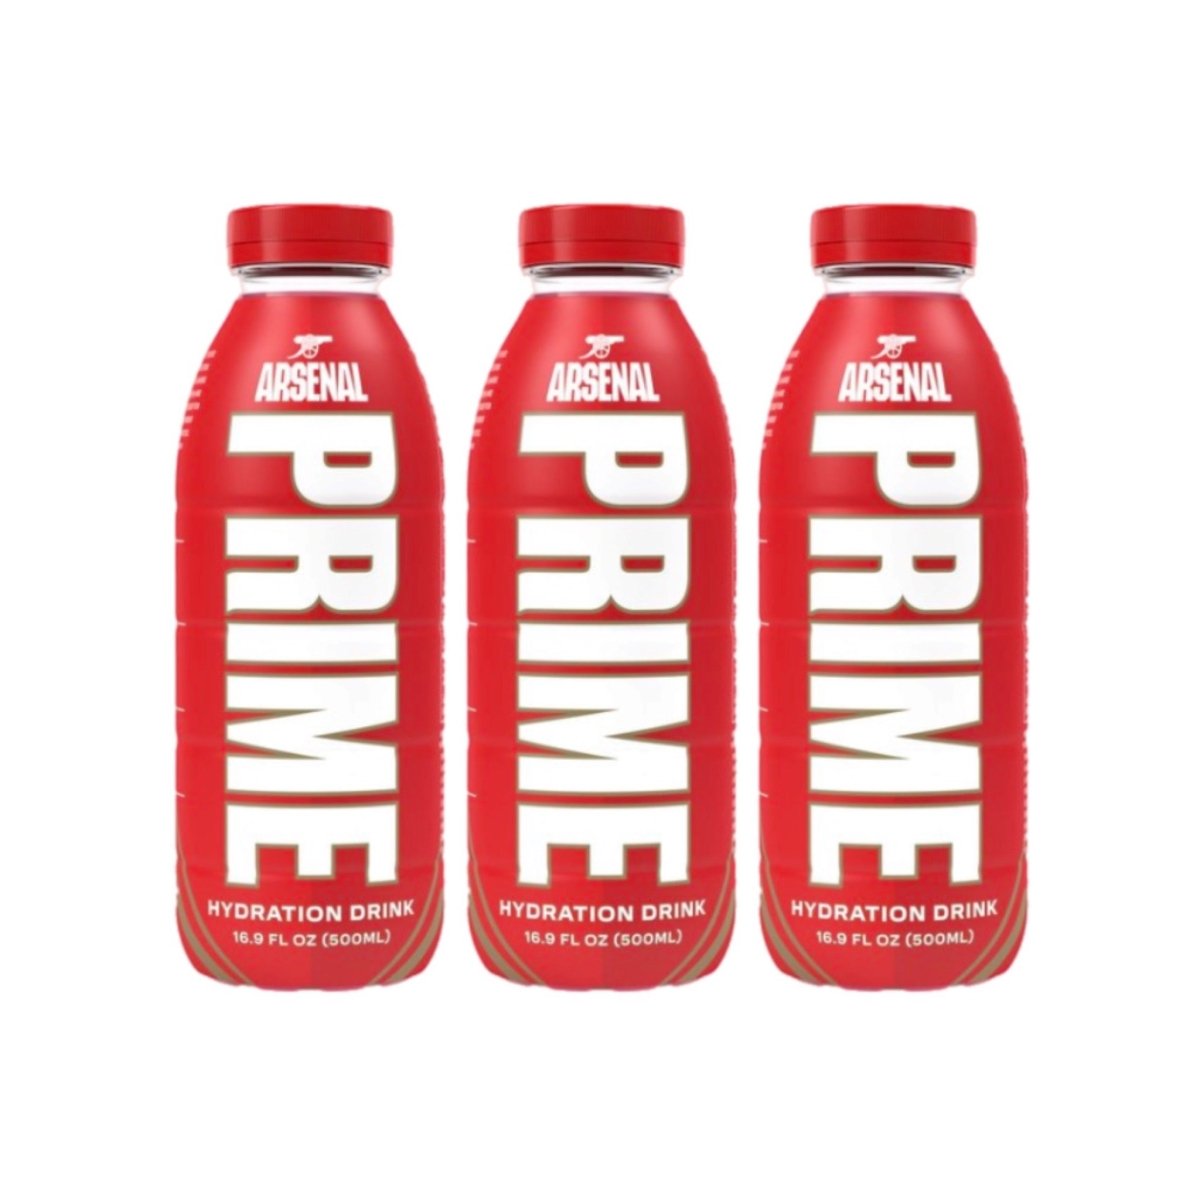 Triple Pack Arsenal Prime Hydration By Logan Paul x KSI- (Pre-Order) 500ml - Candy Mail UK